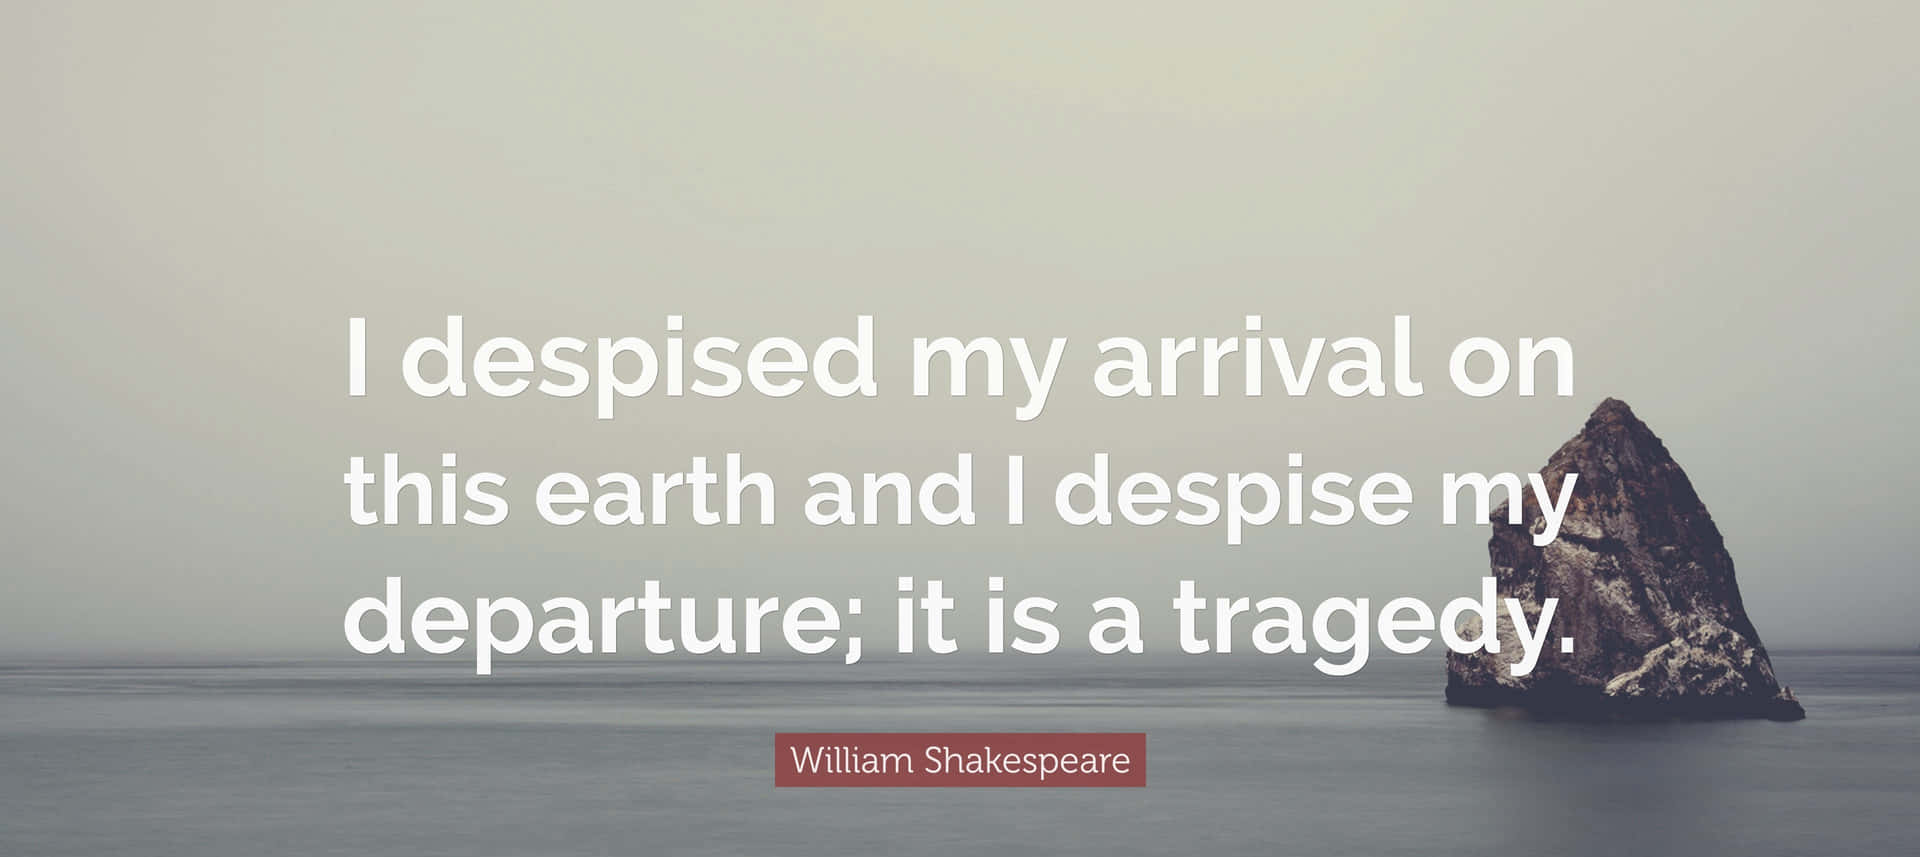 Shakespeare Tragedy Quote Ocean Backdrop Wallpaper